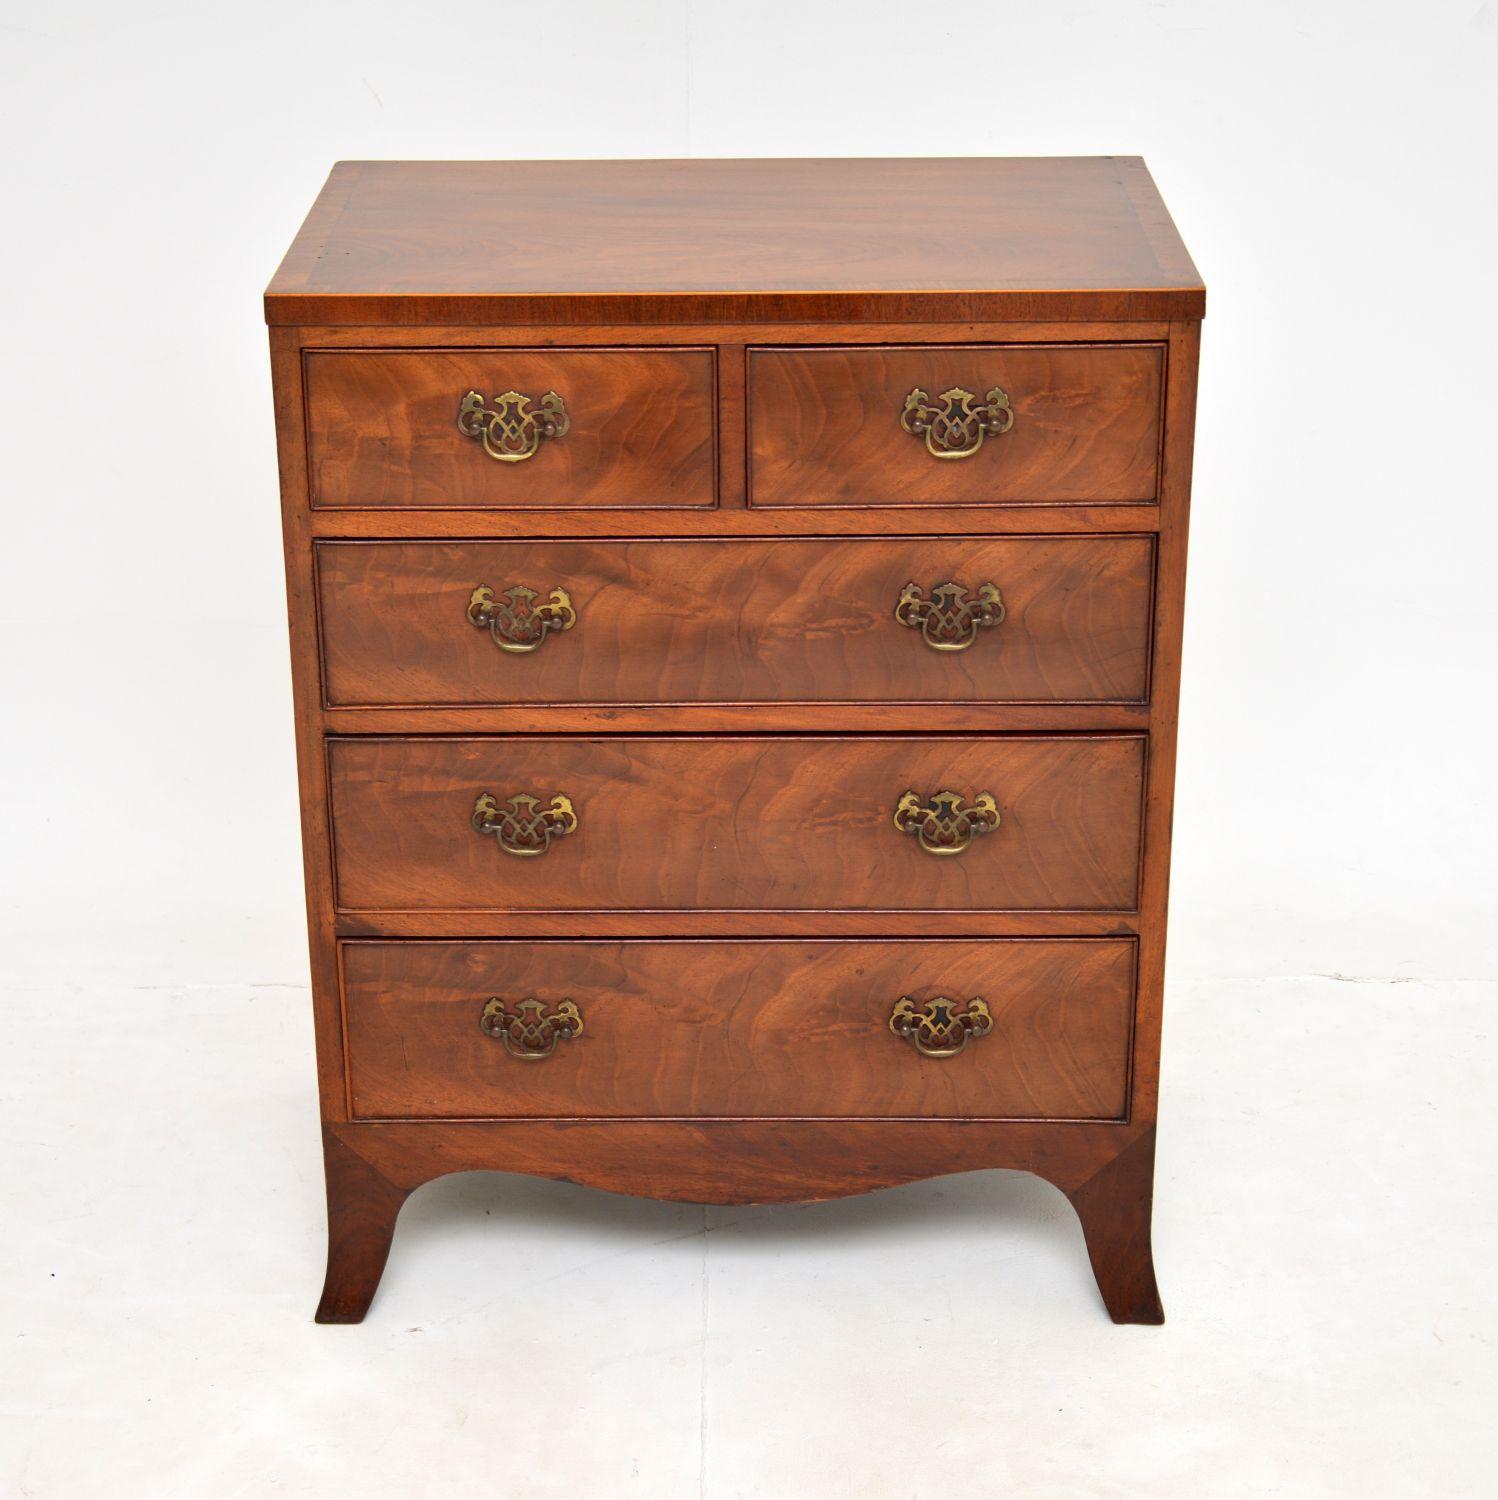 An excellent small proportioned antique Edwardian chest of drawers. This was made in England, it dates from around the 1900-1910 period.
The quality is excellent, this is very well made and is a very useful size. It sits on splayed bracket feet,